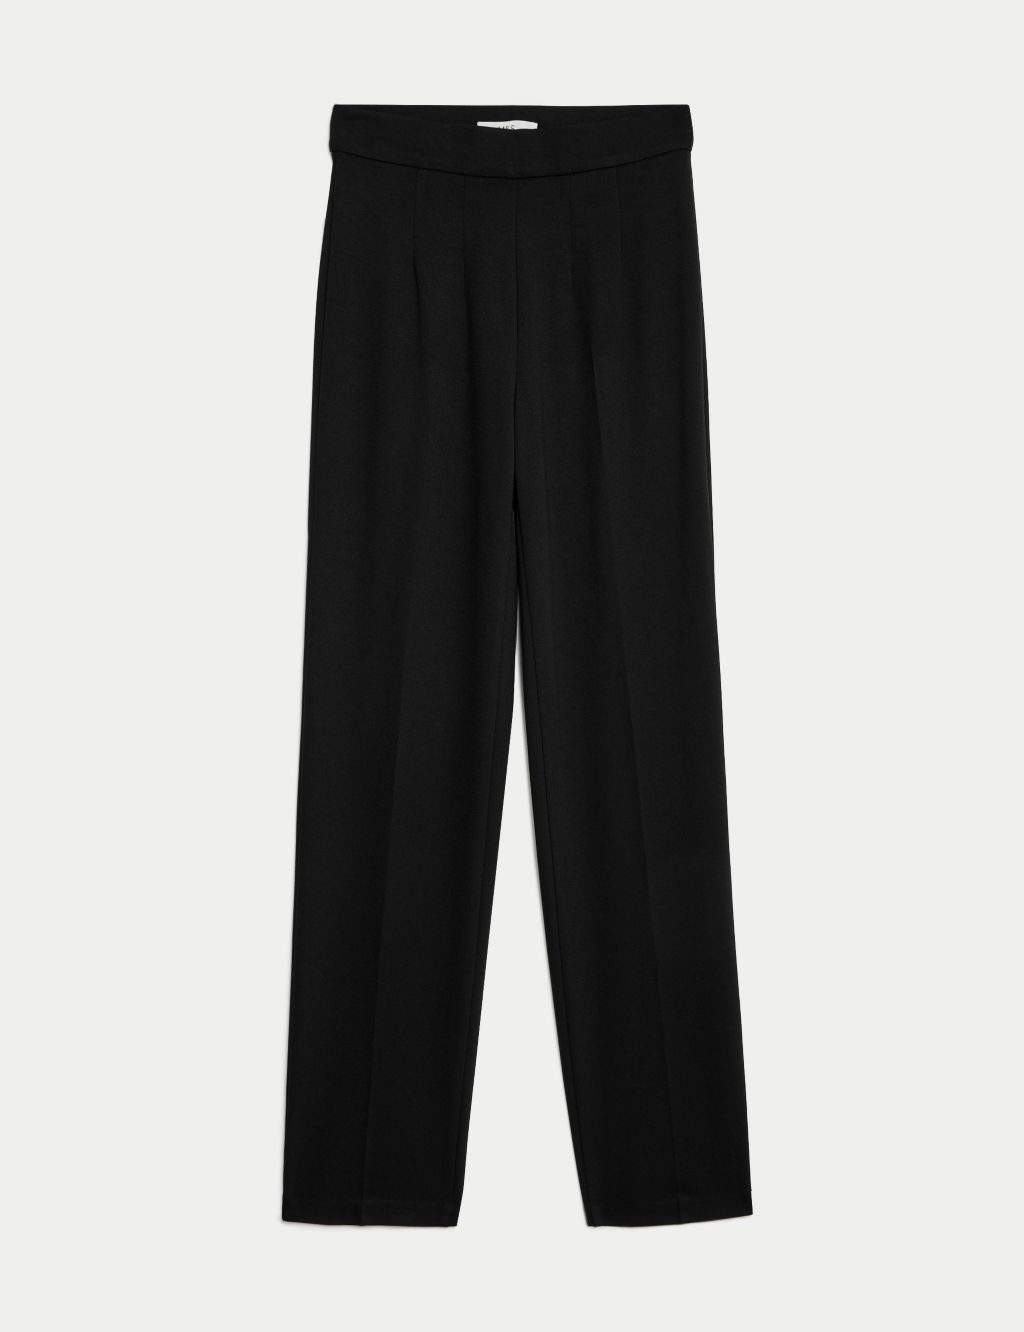 Jersey Straight Leg Trousers with Stretch image 2